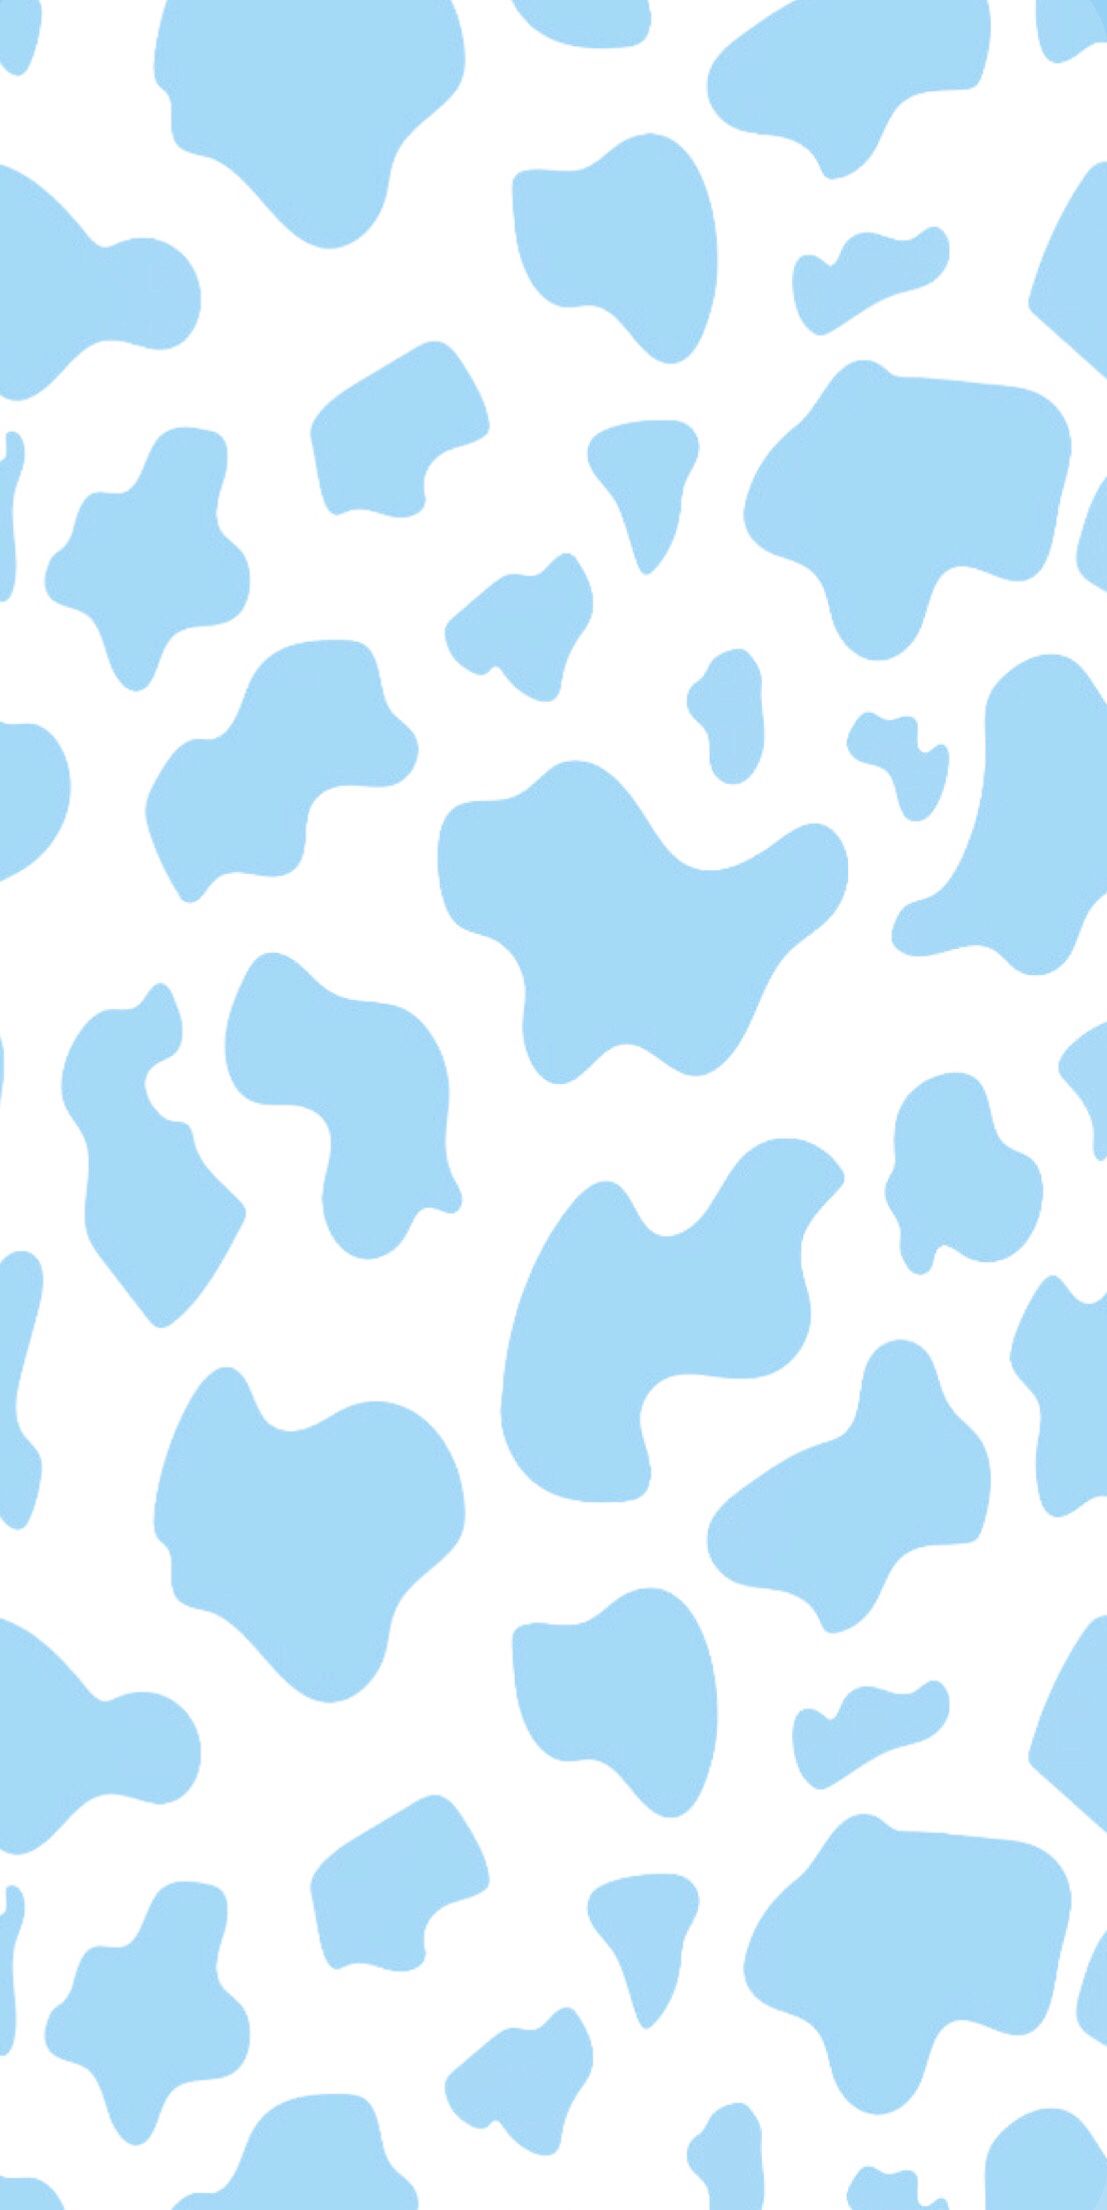 Aesthetic Cow Print Iphone Wallpapers